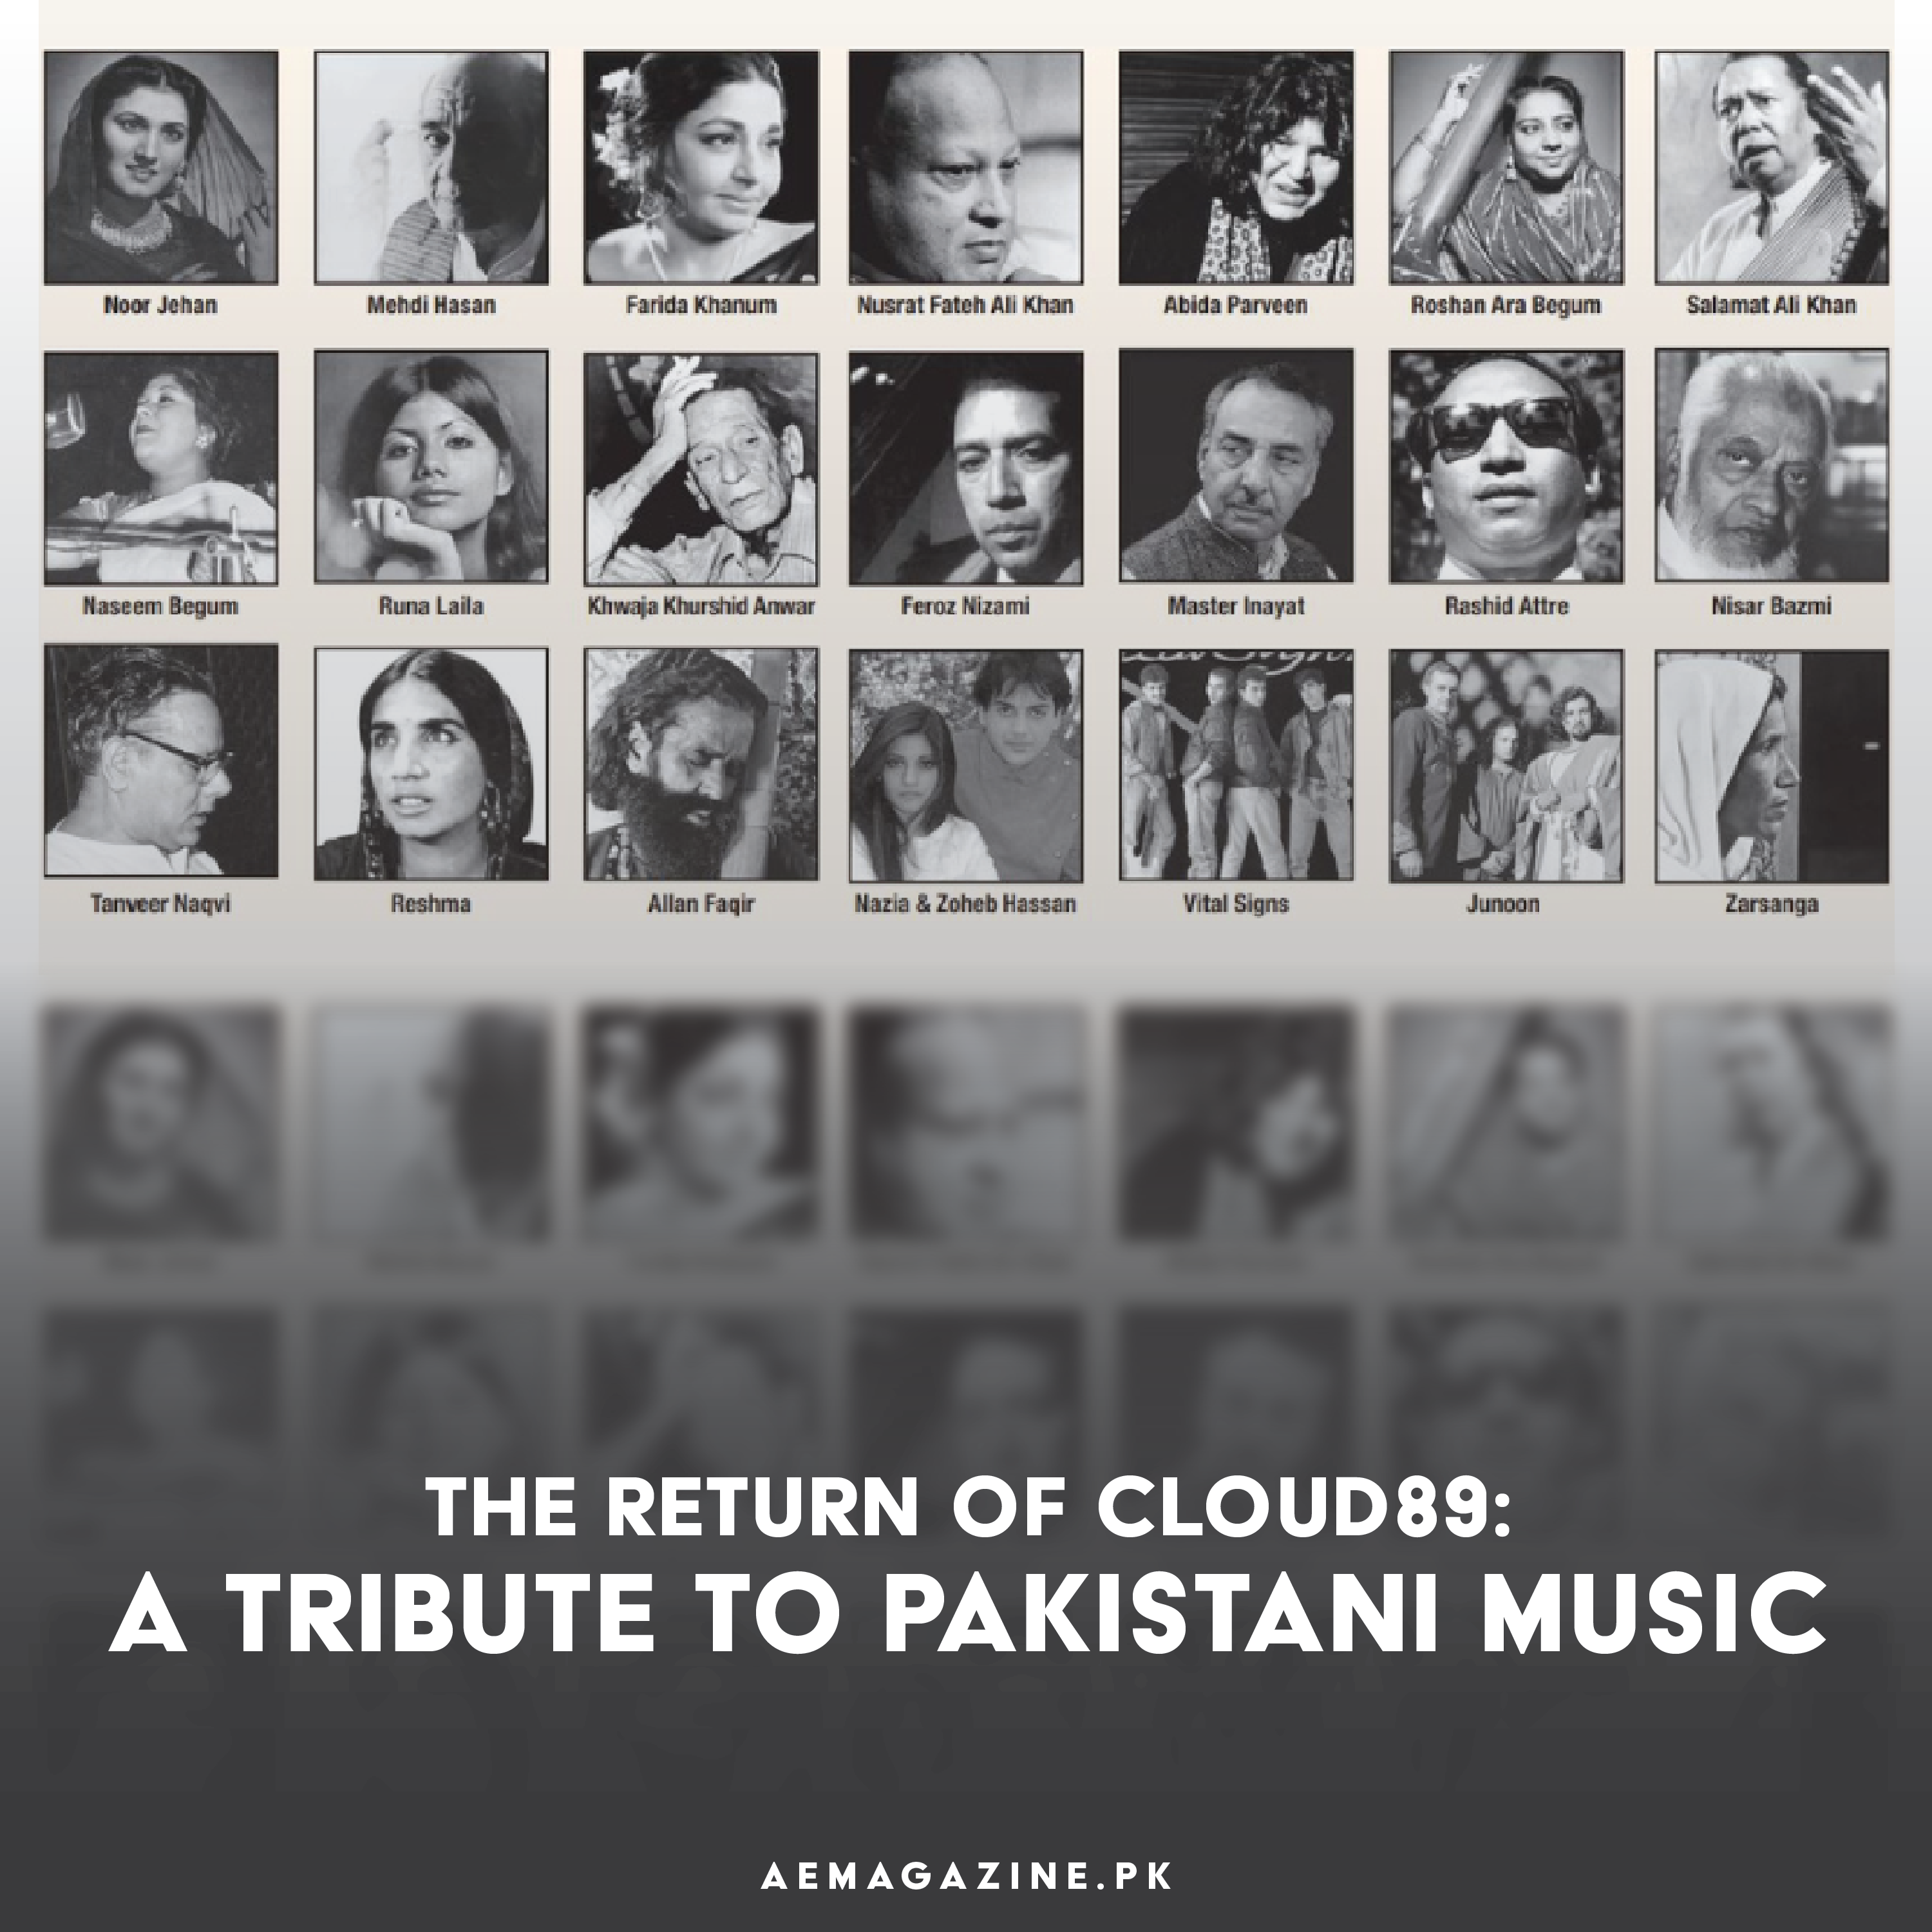 The Return of Cloud89: A Tribute to Pakistani Music